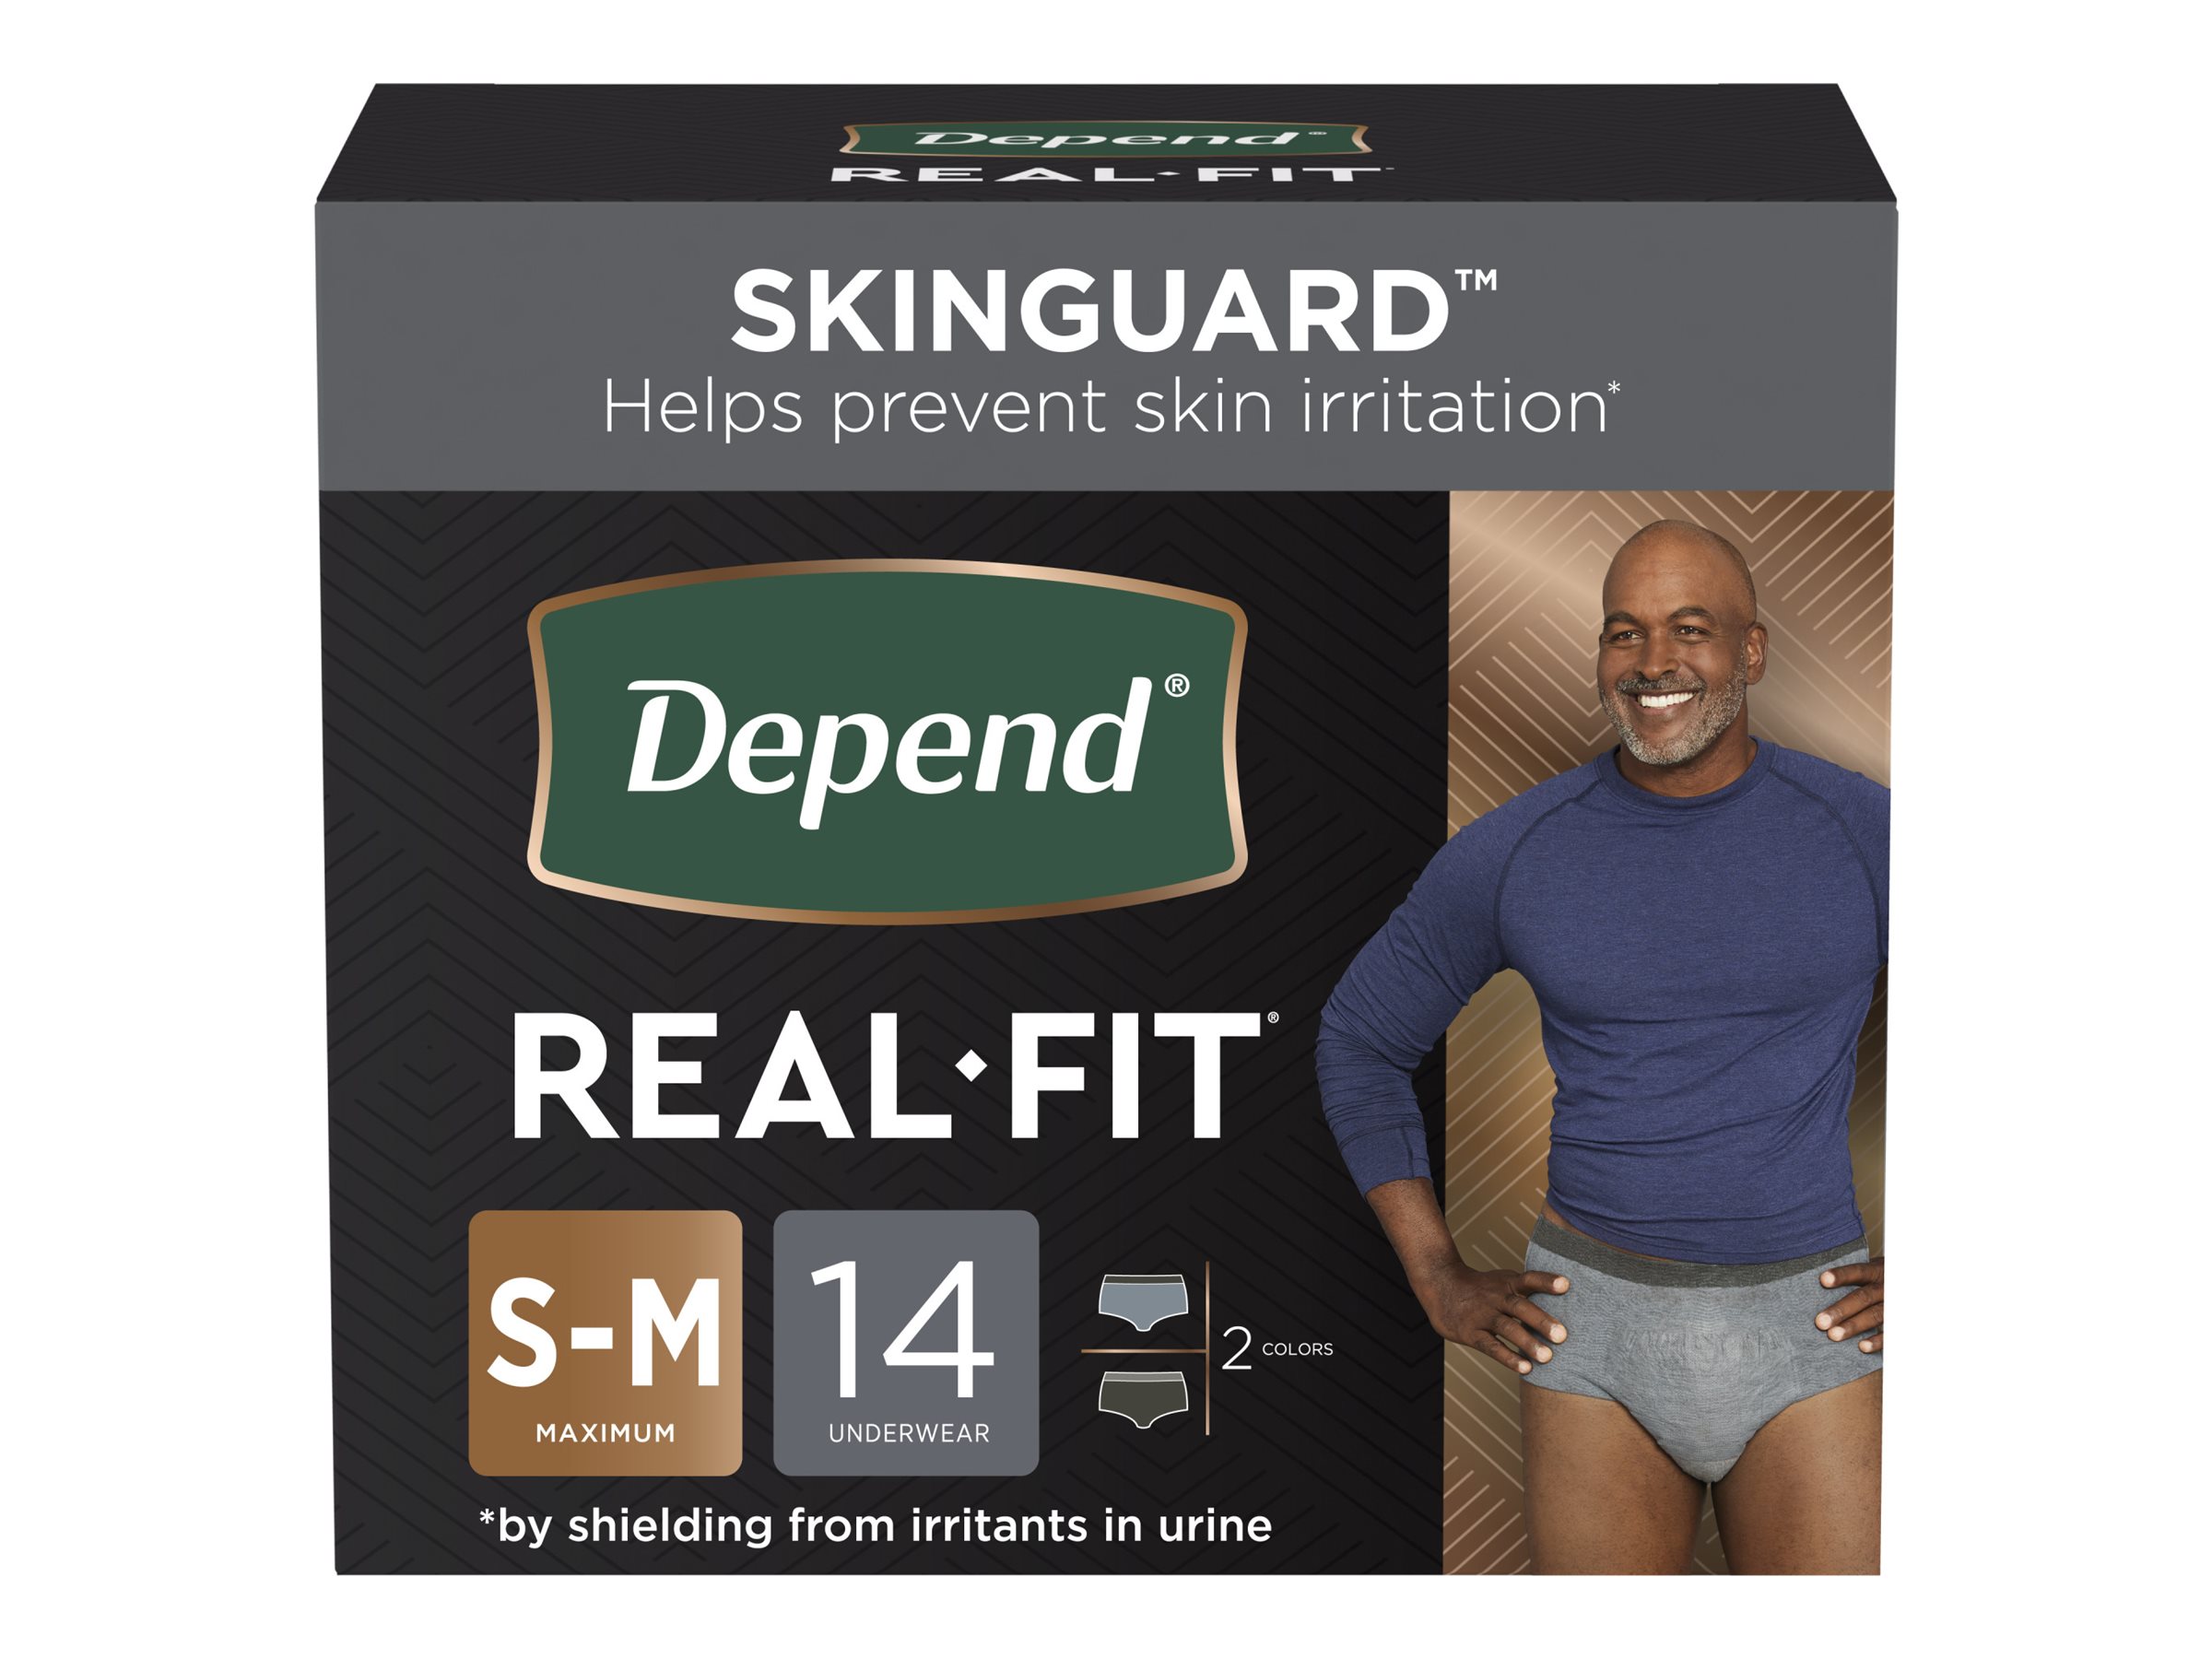 Always Discreet Maximum Absorbency Pull-On Underwear - Personally Delivered